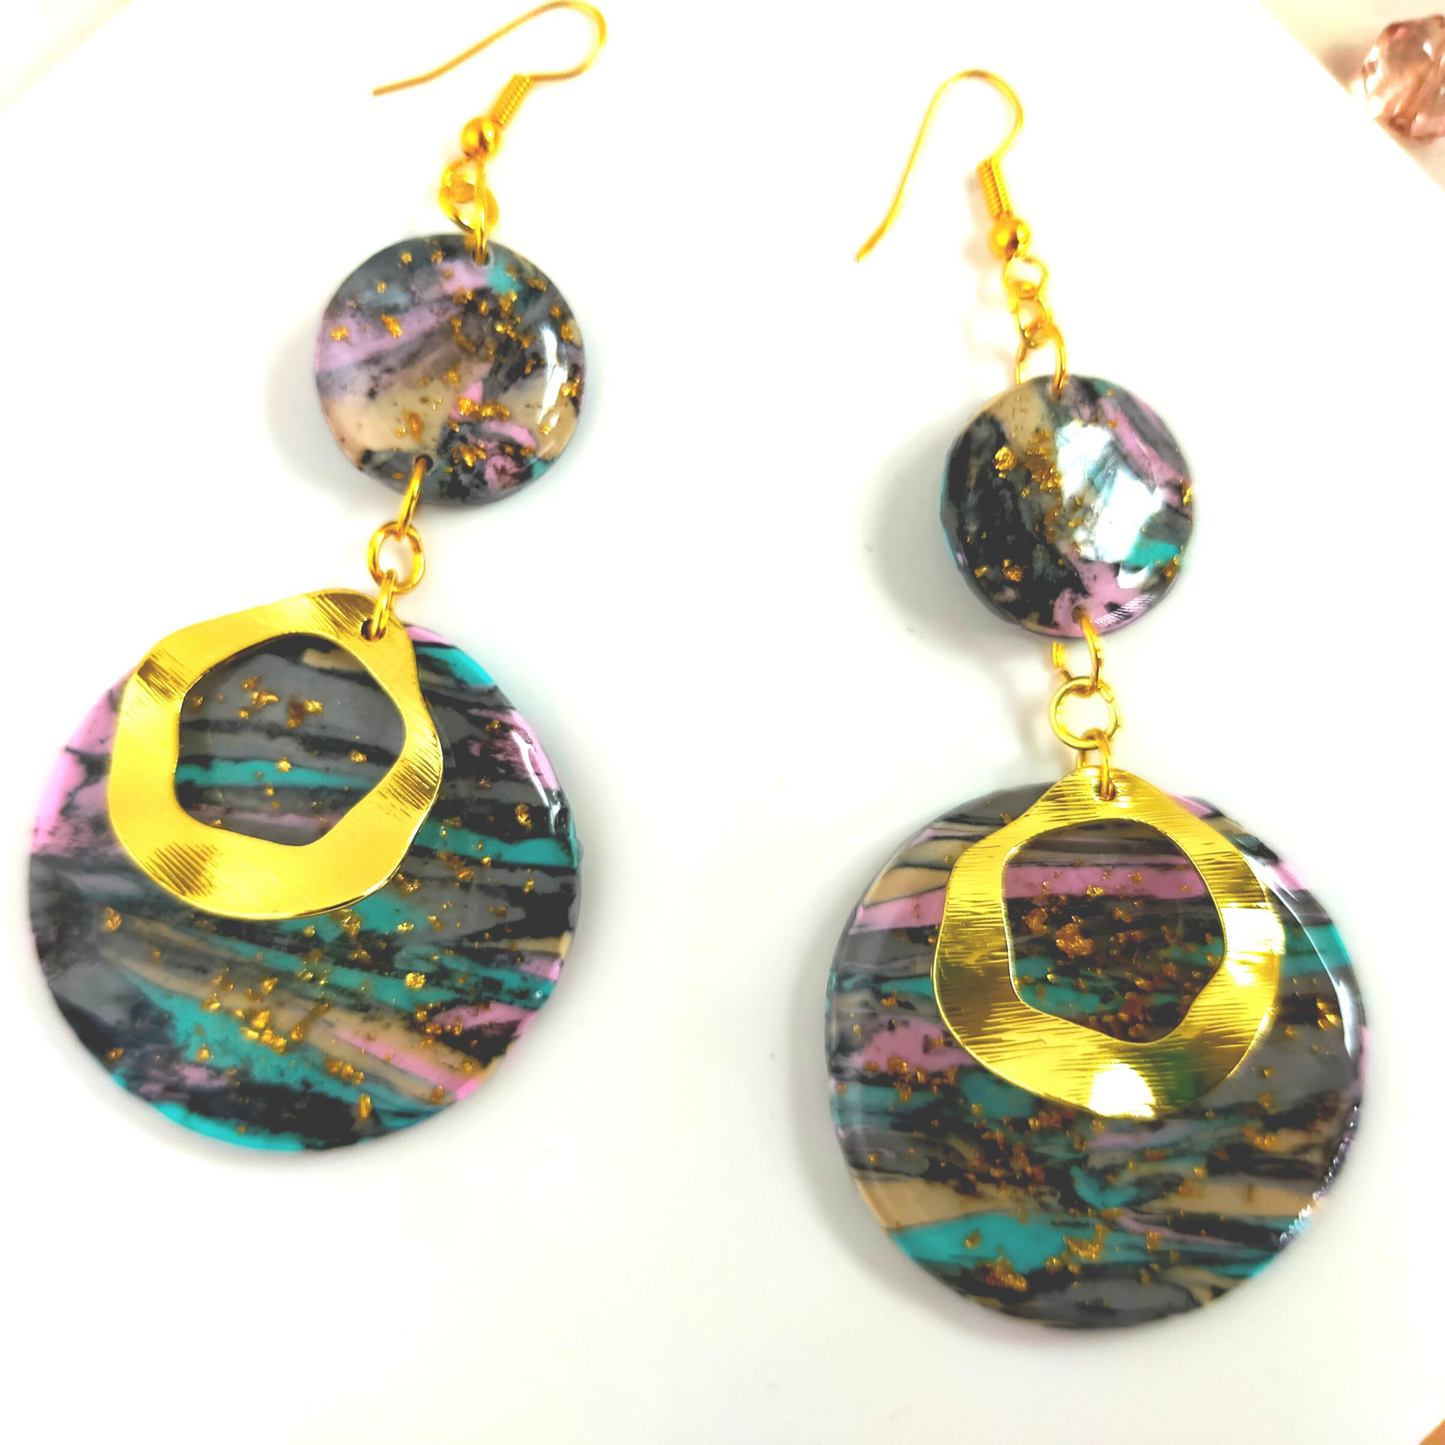 "Harper" polymer clay earrings with circle charm